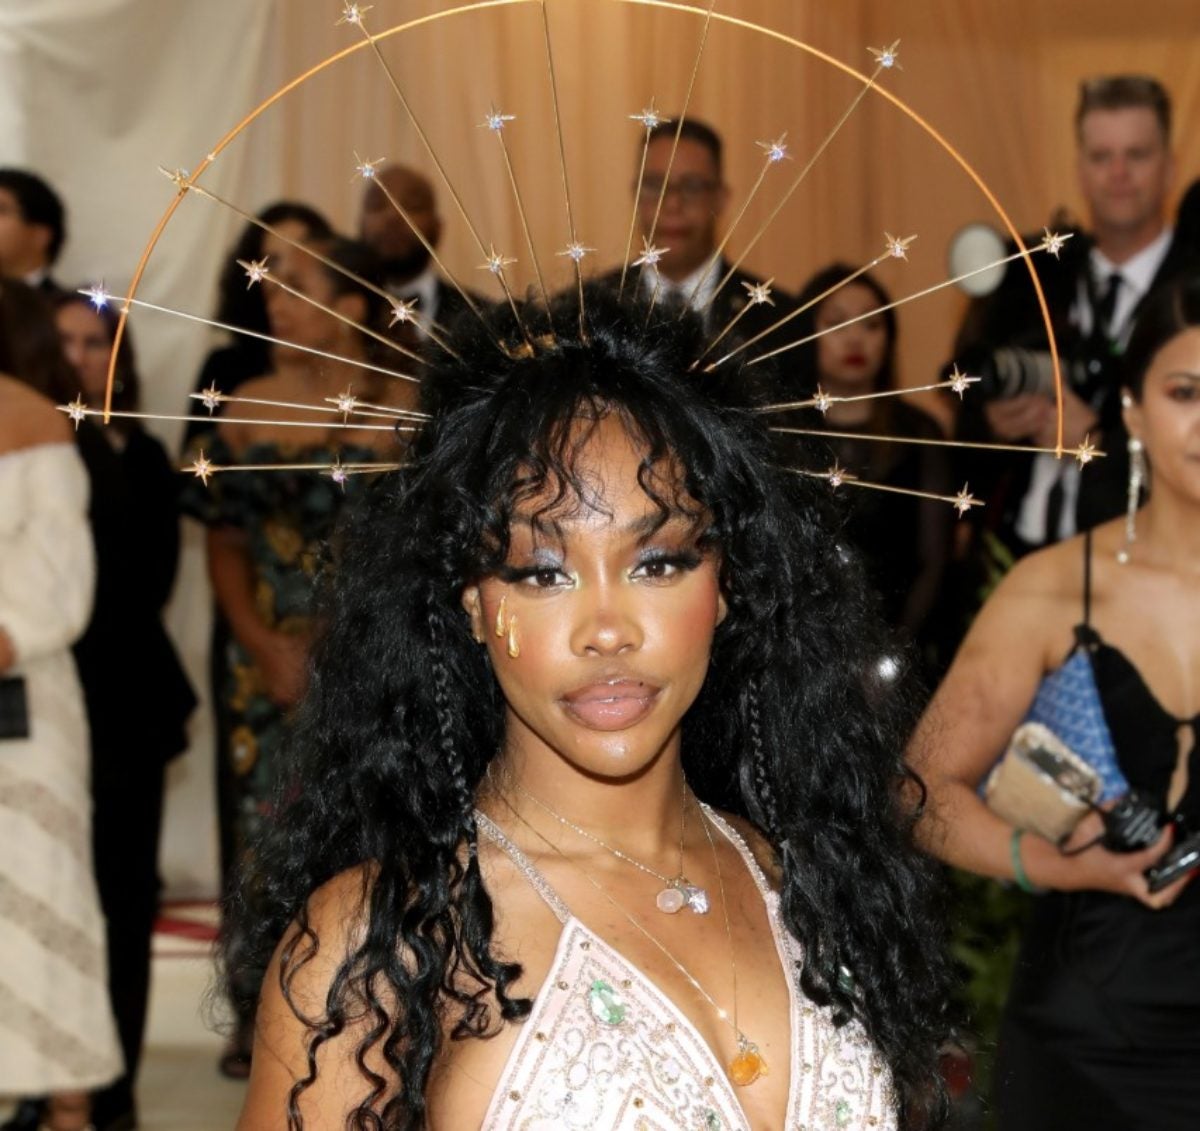 Sephora closes US stores for 1-hour diversity training after SZA incident